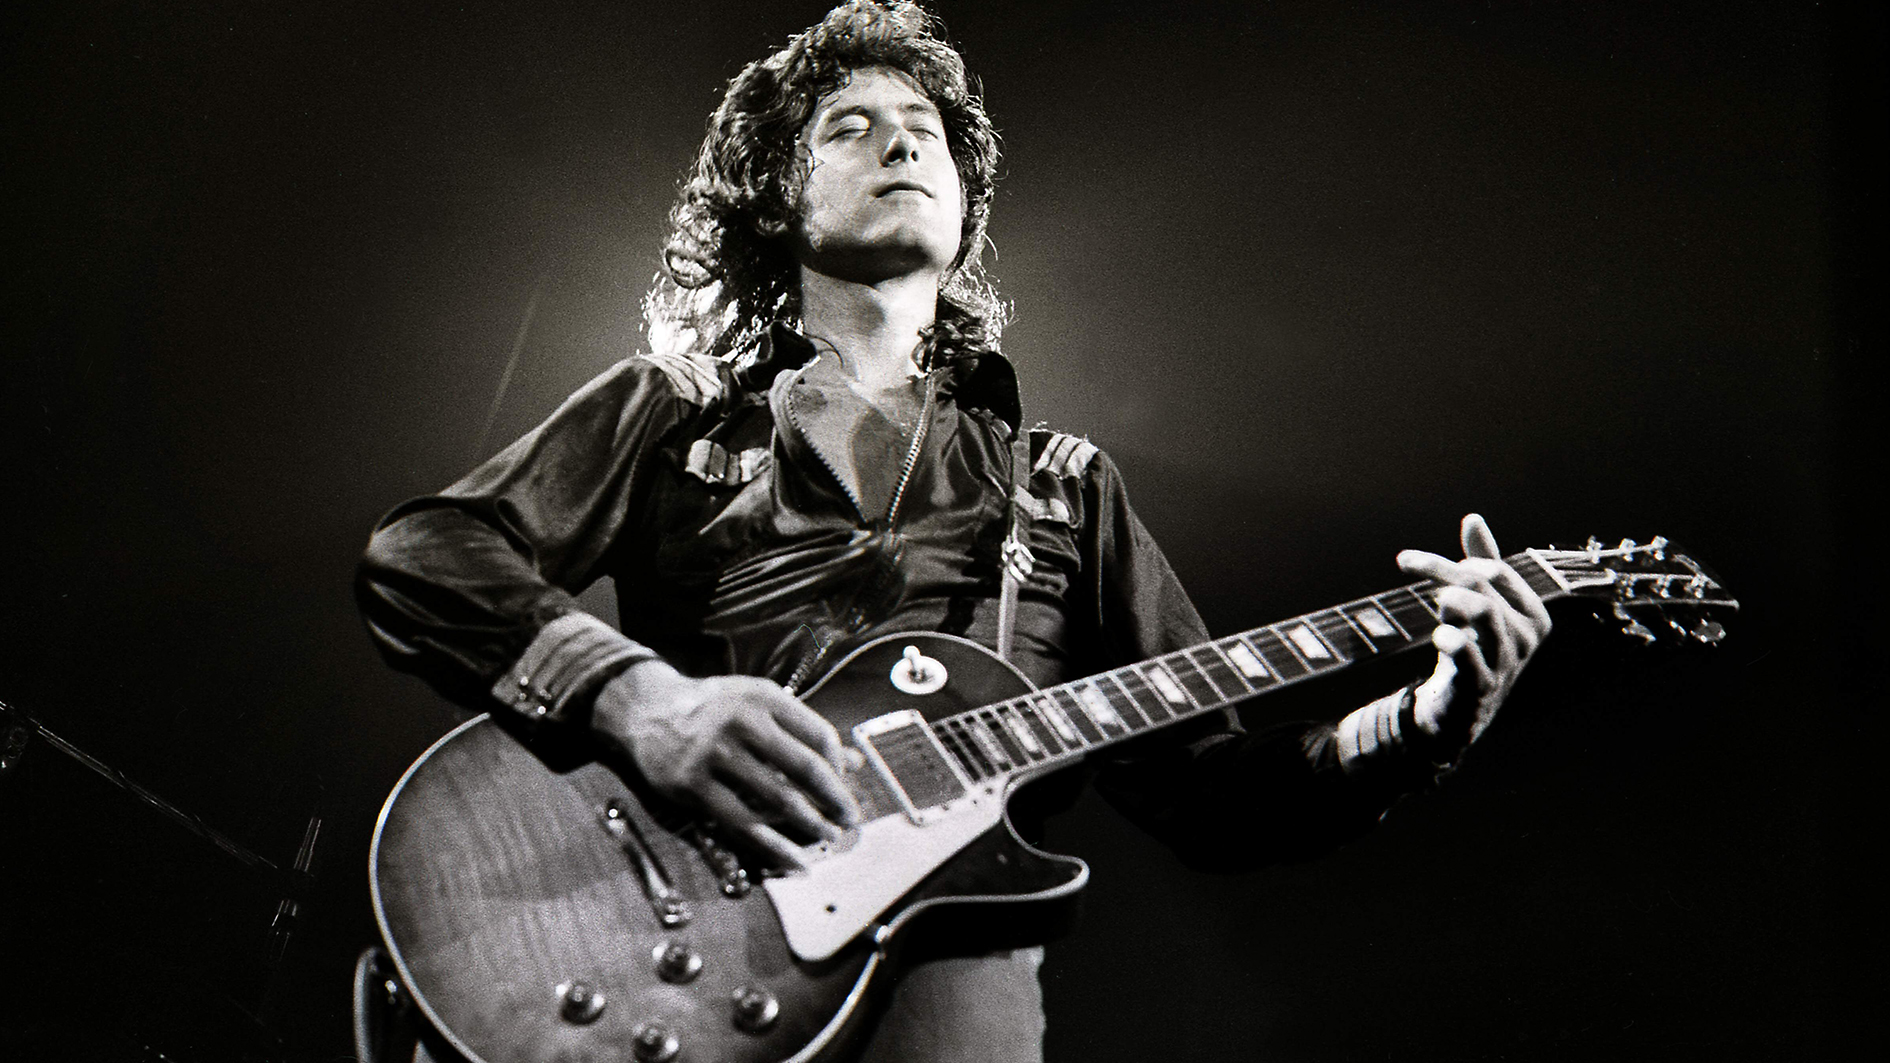 Jimmy Page's guitar everything you to nail the Led Zeppelin legend's sound | Guitar World